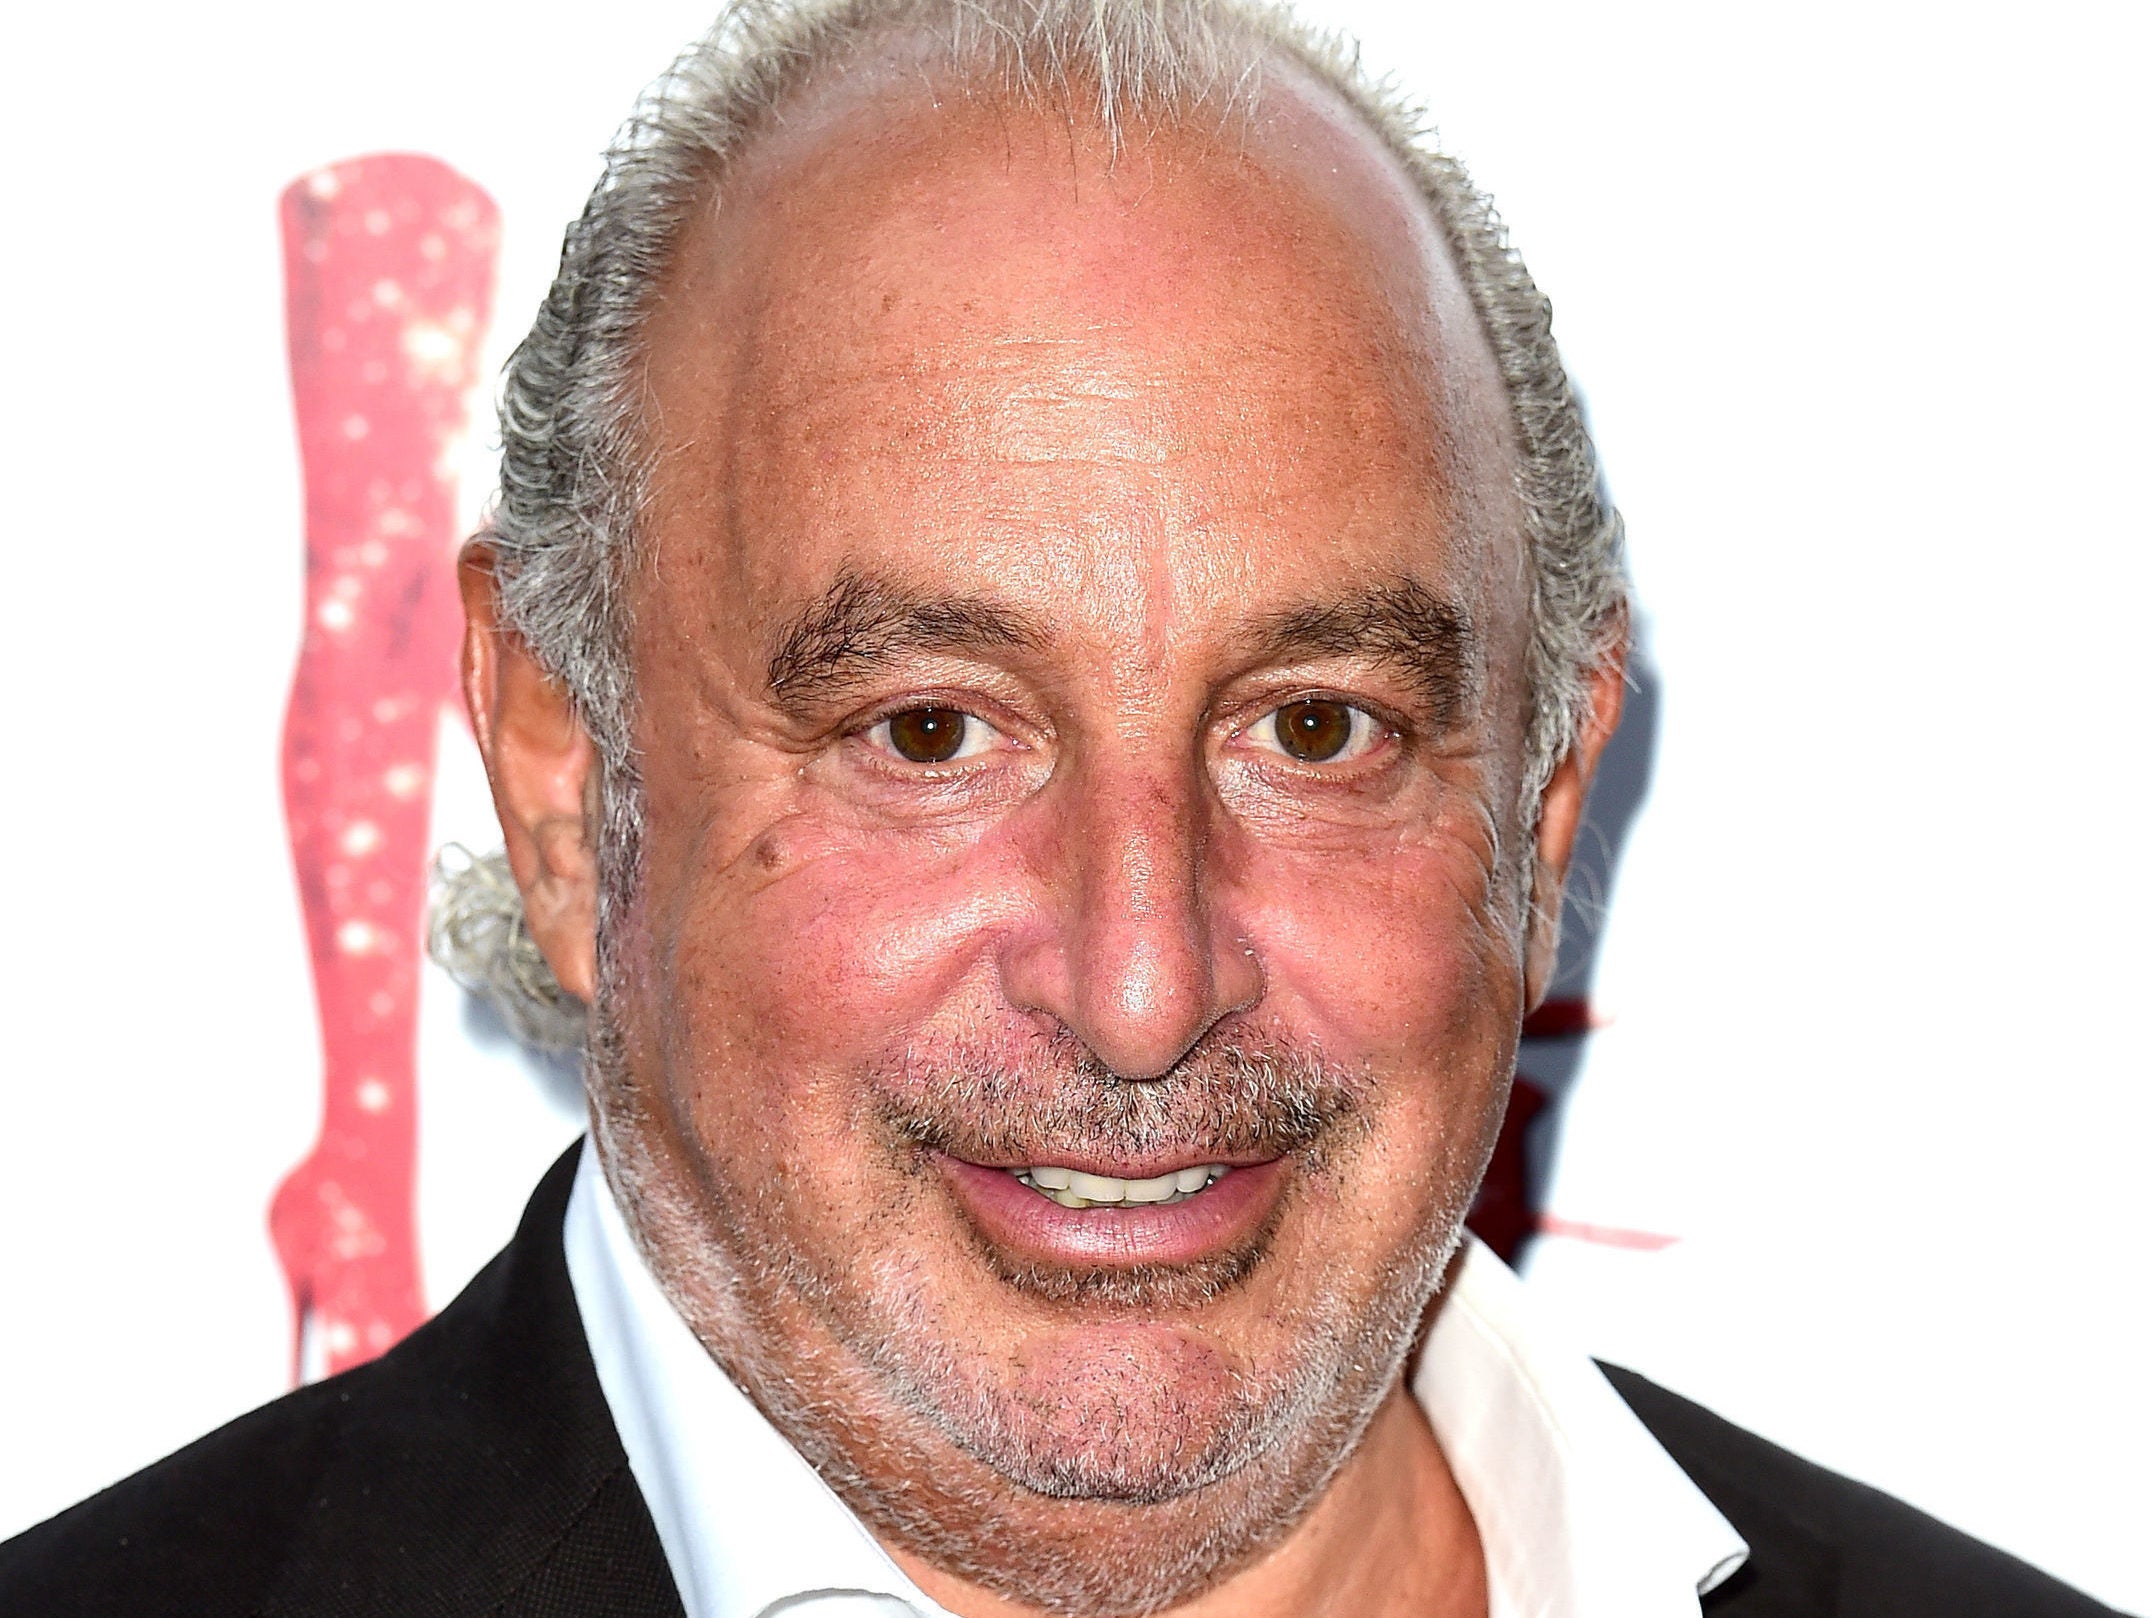 Lawyers for Sir Philip Green failed in bid to force Daily Telegraph to reveal its sources during High Court battle